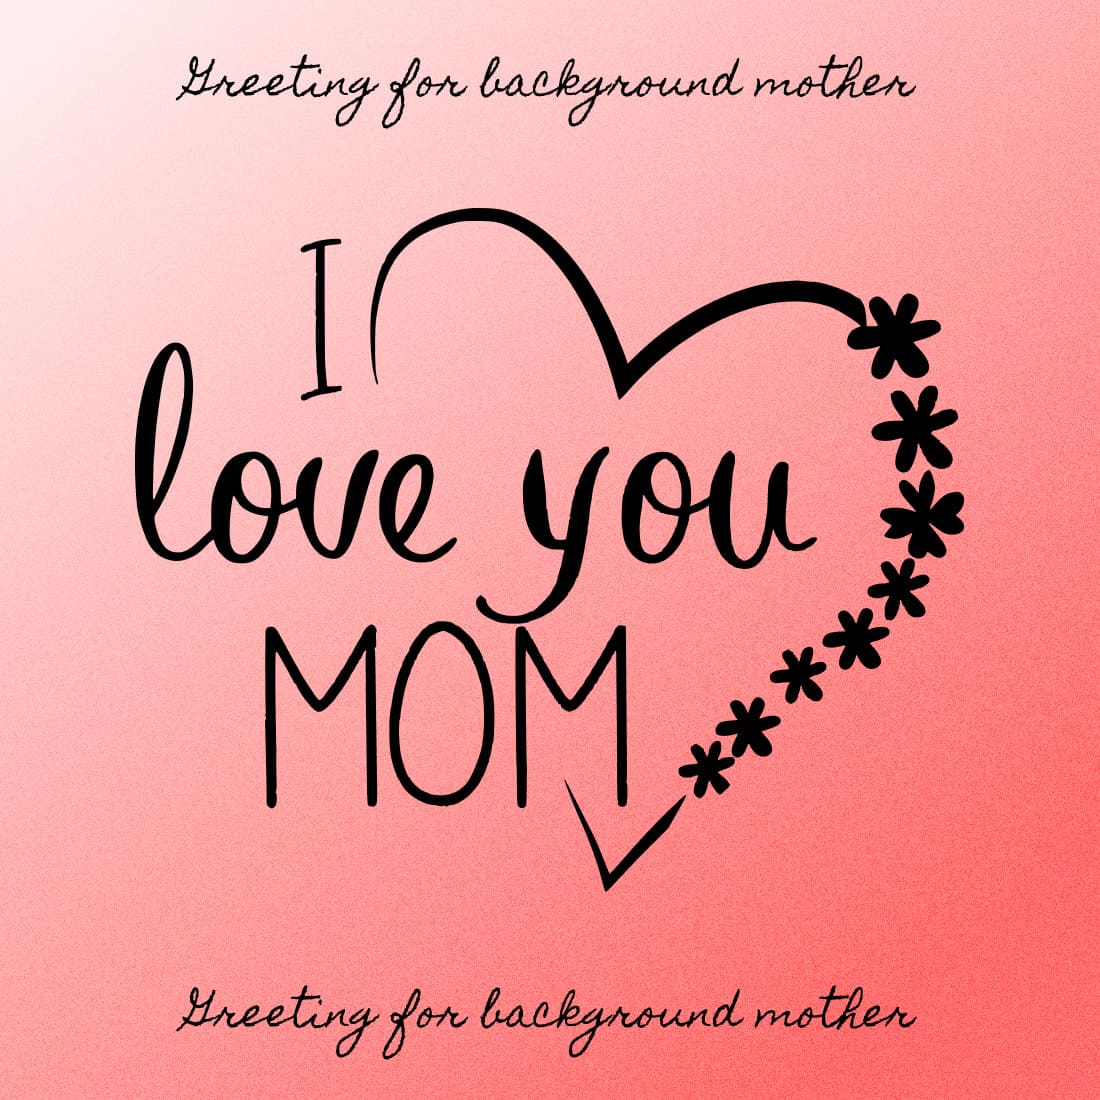 Greeting For Background Mother - Pink Image.